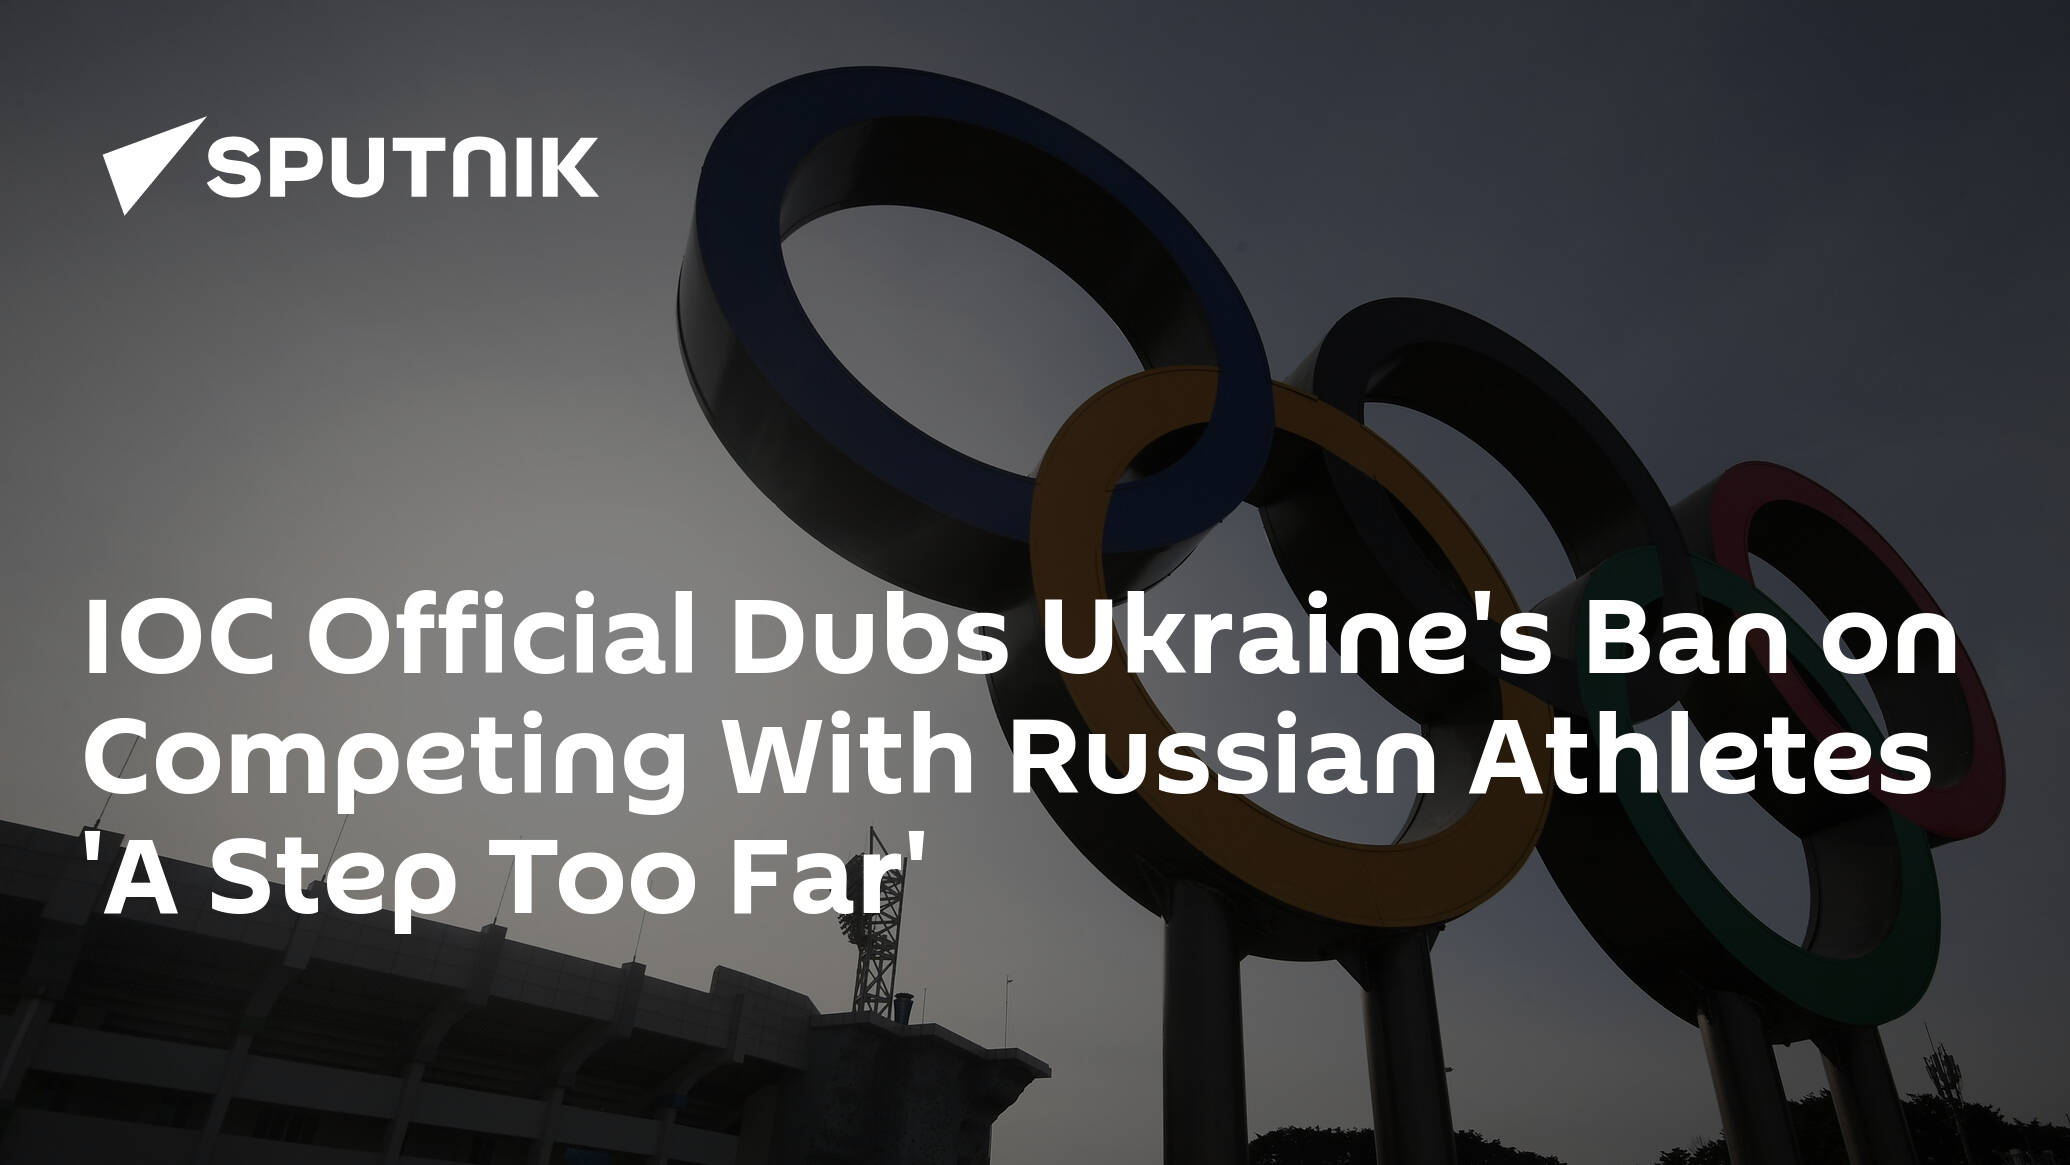 IOC Official Dubs Ukraine's Ban on Competing With Russian Athletes 'A Step Too Far'